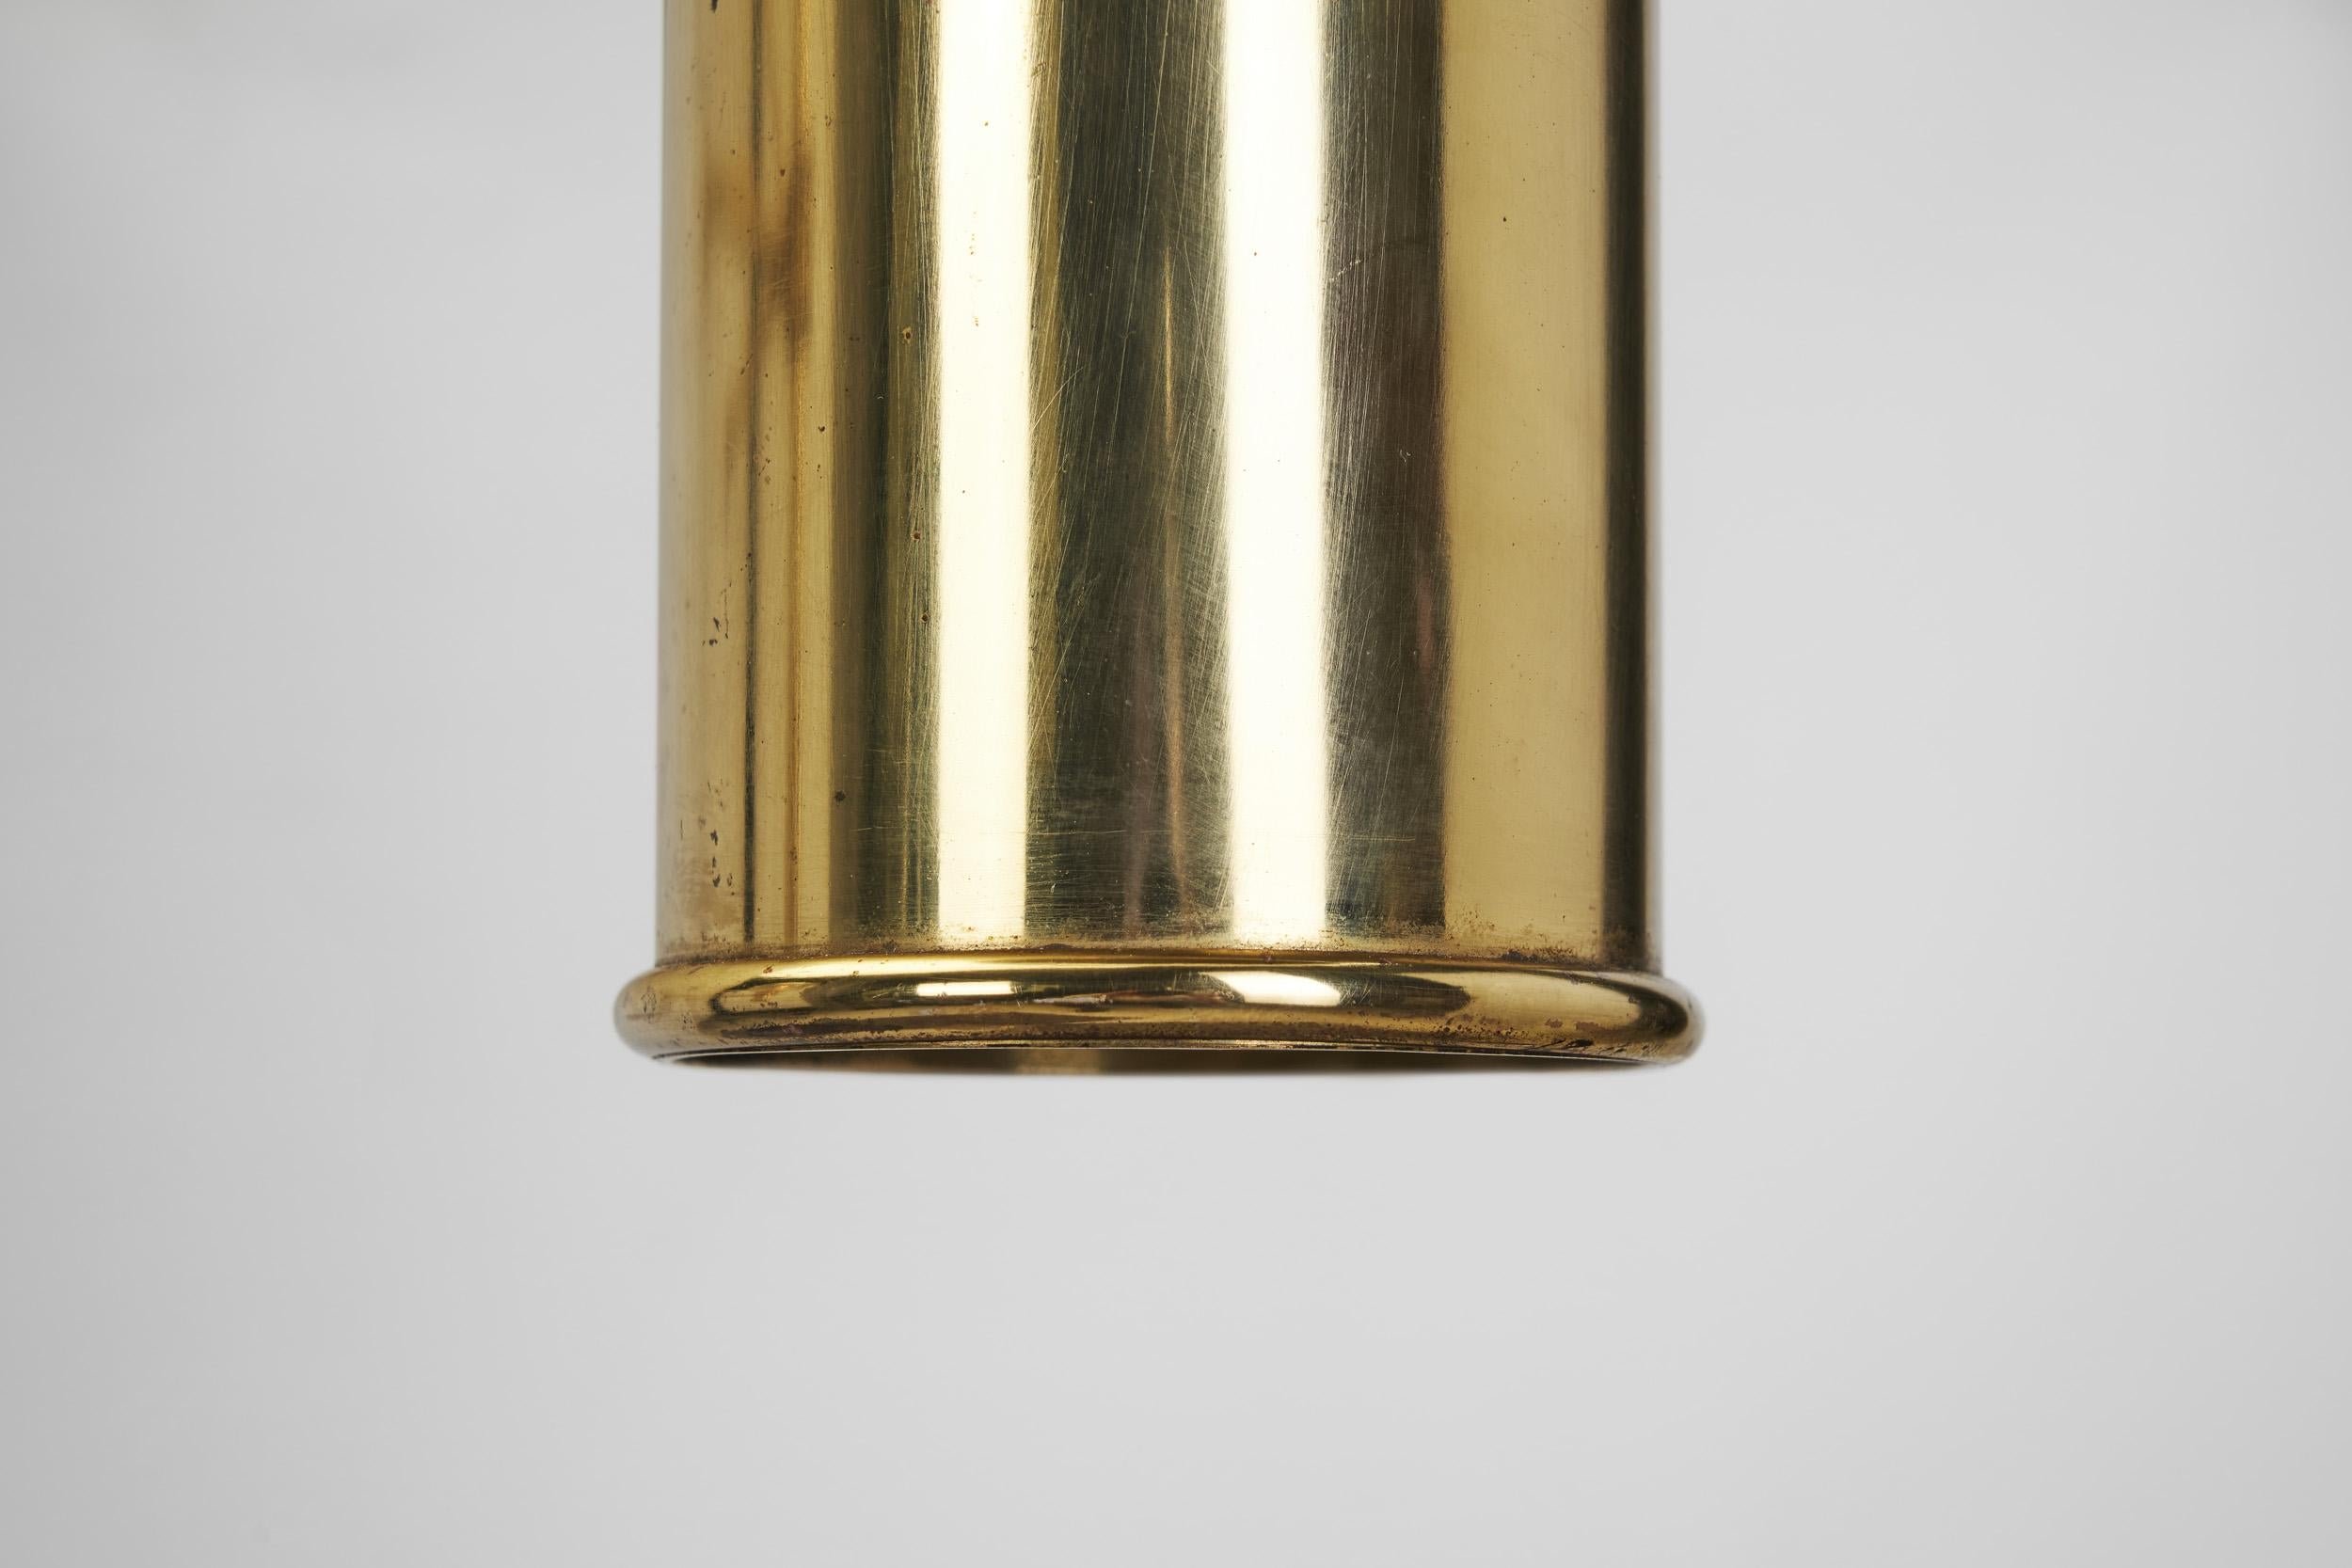 Large European Modern Wall Sconce in Brass & Bubble Glass, Europe circa 1950s For Sale 8